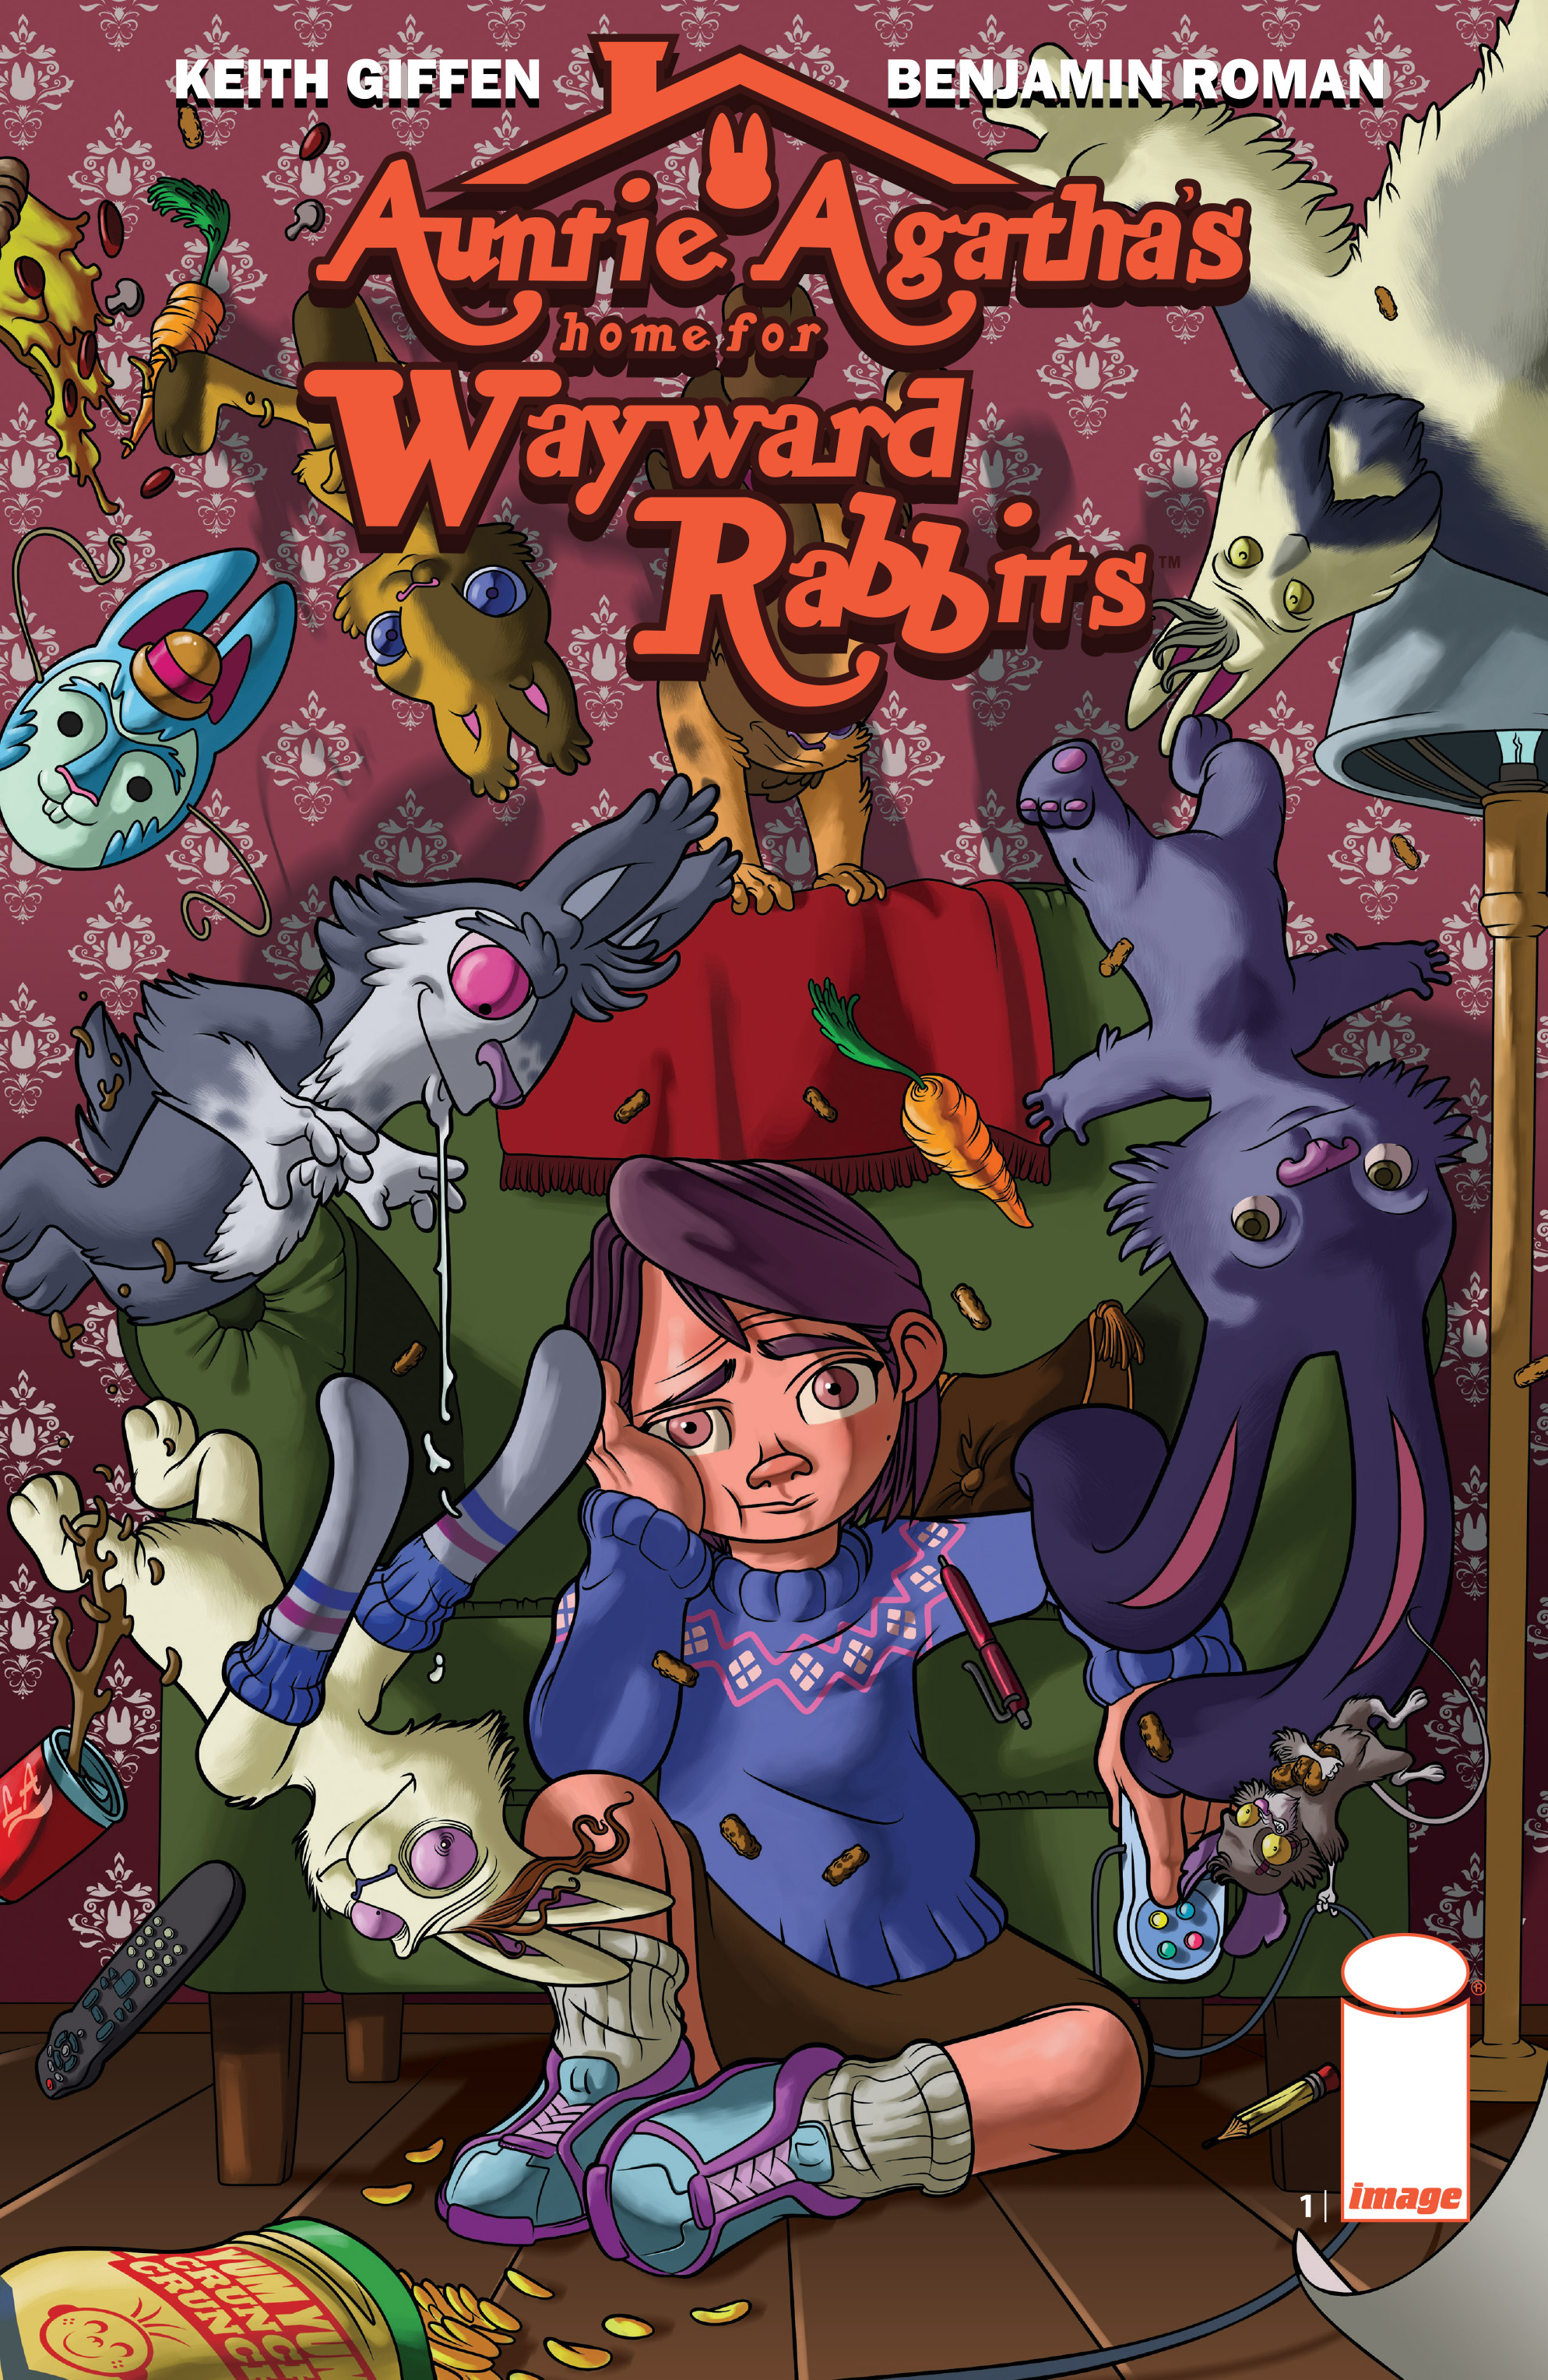 Auntie Agatha's Home For Wayward Rabbits (2018-): Chapter 1 - Page 1